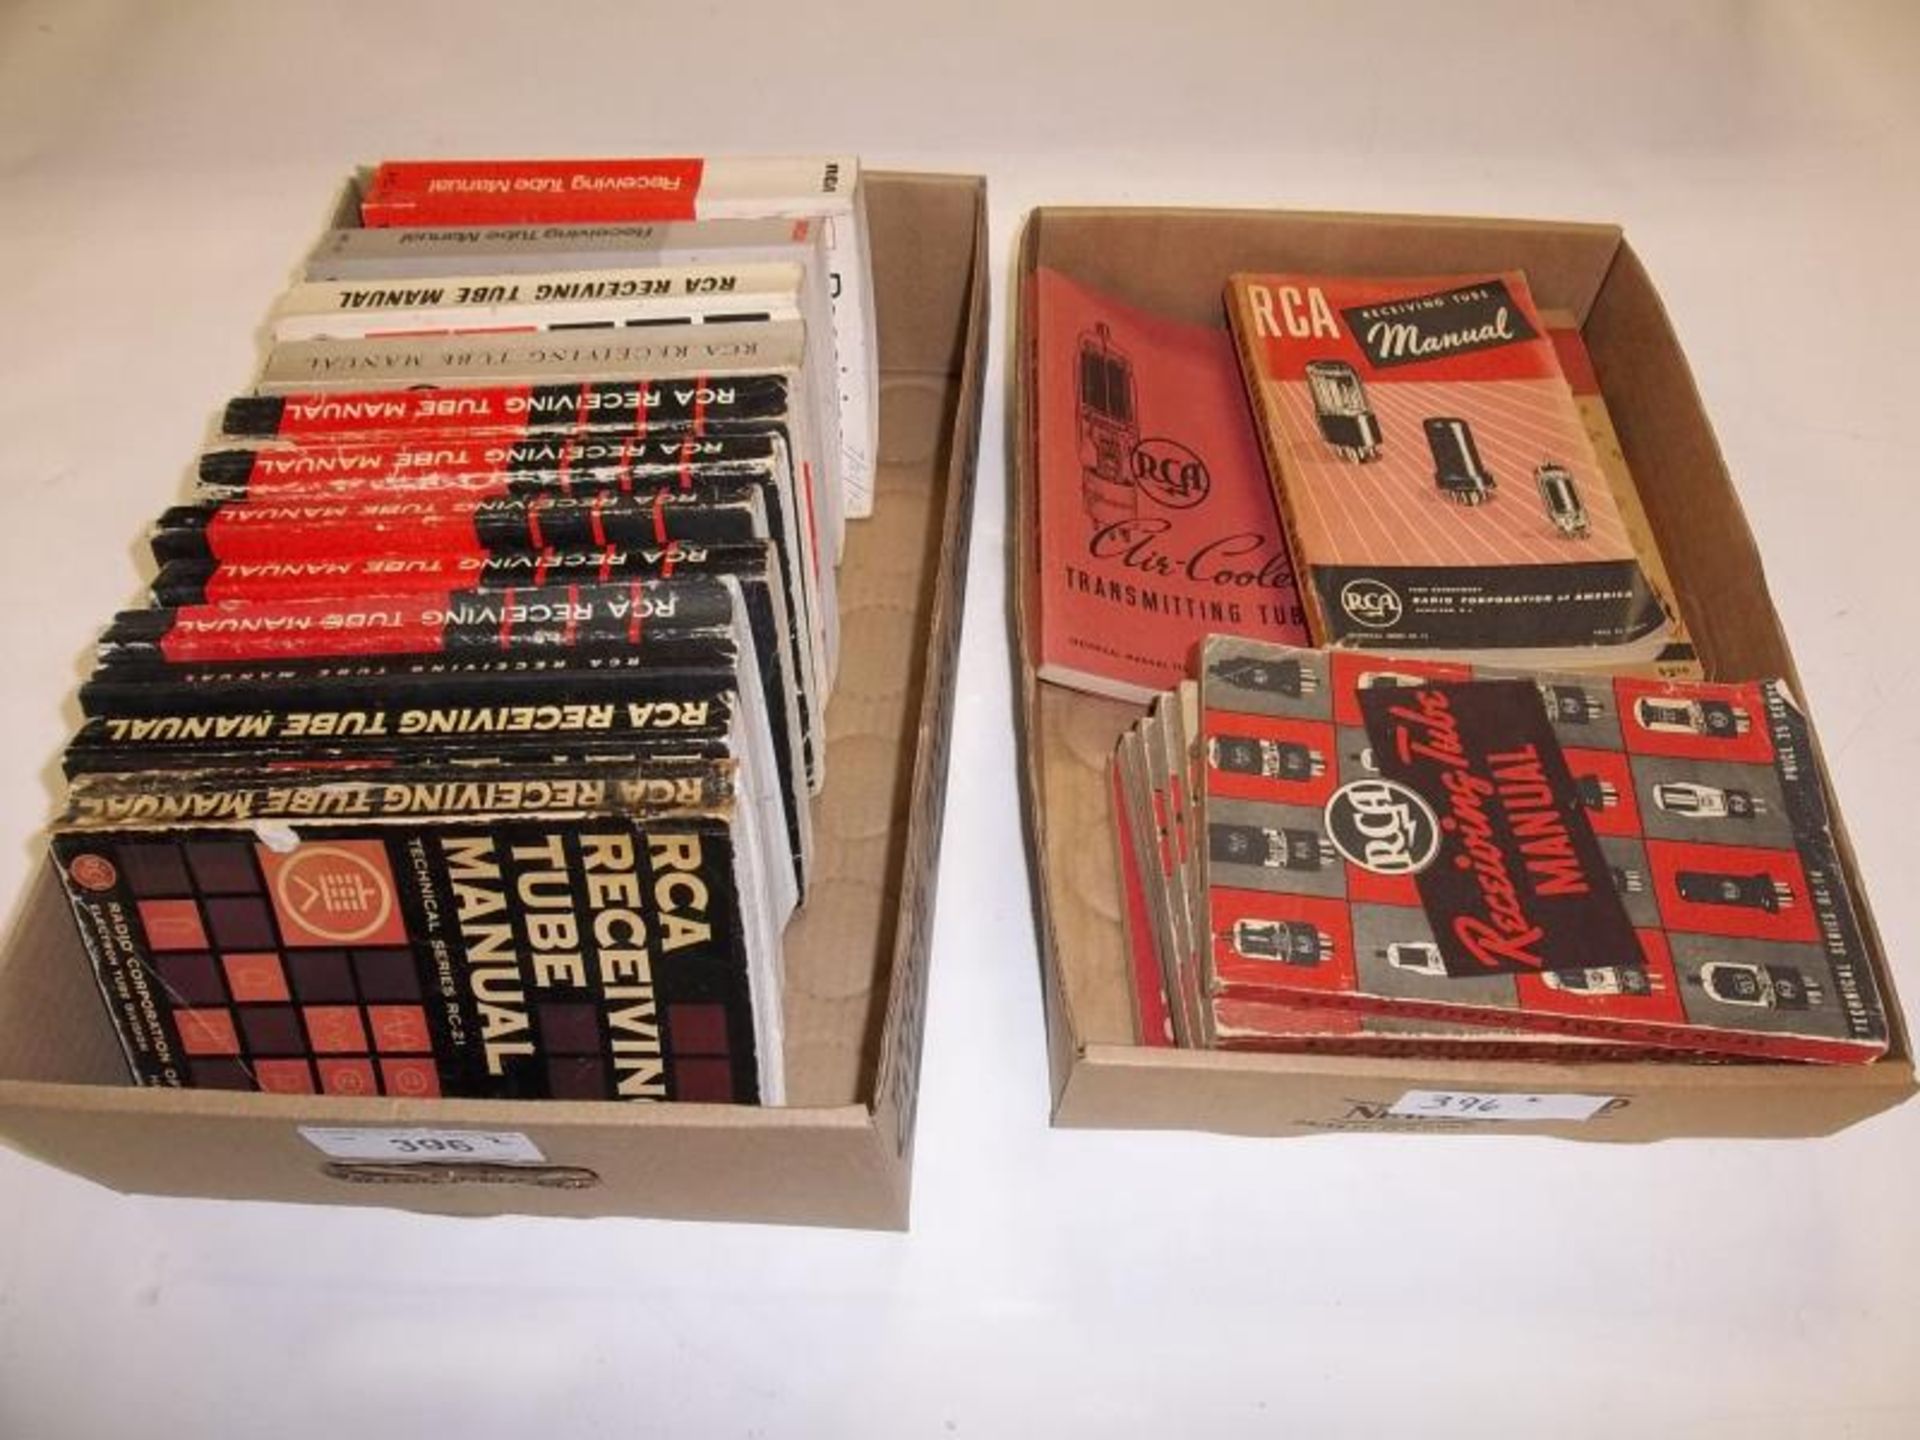 Lot of 22 Paperbacks, mostly 20 RCA Receiving Tube Manuals and 2 High Fidelty Books, 150s, 60s and